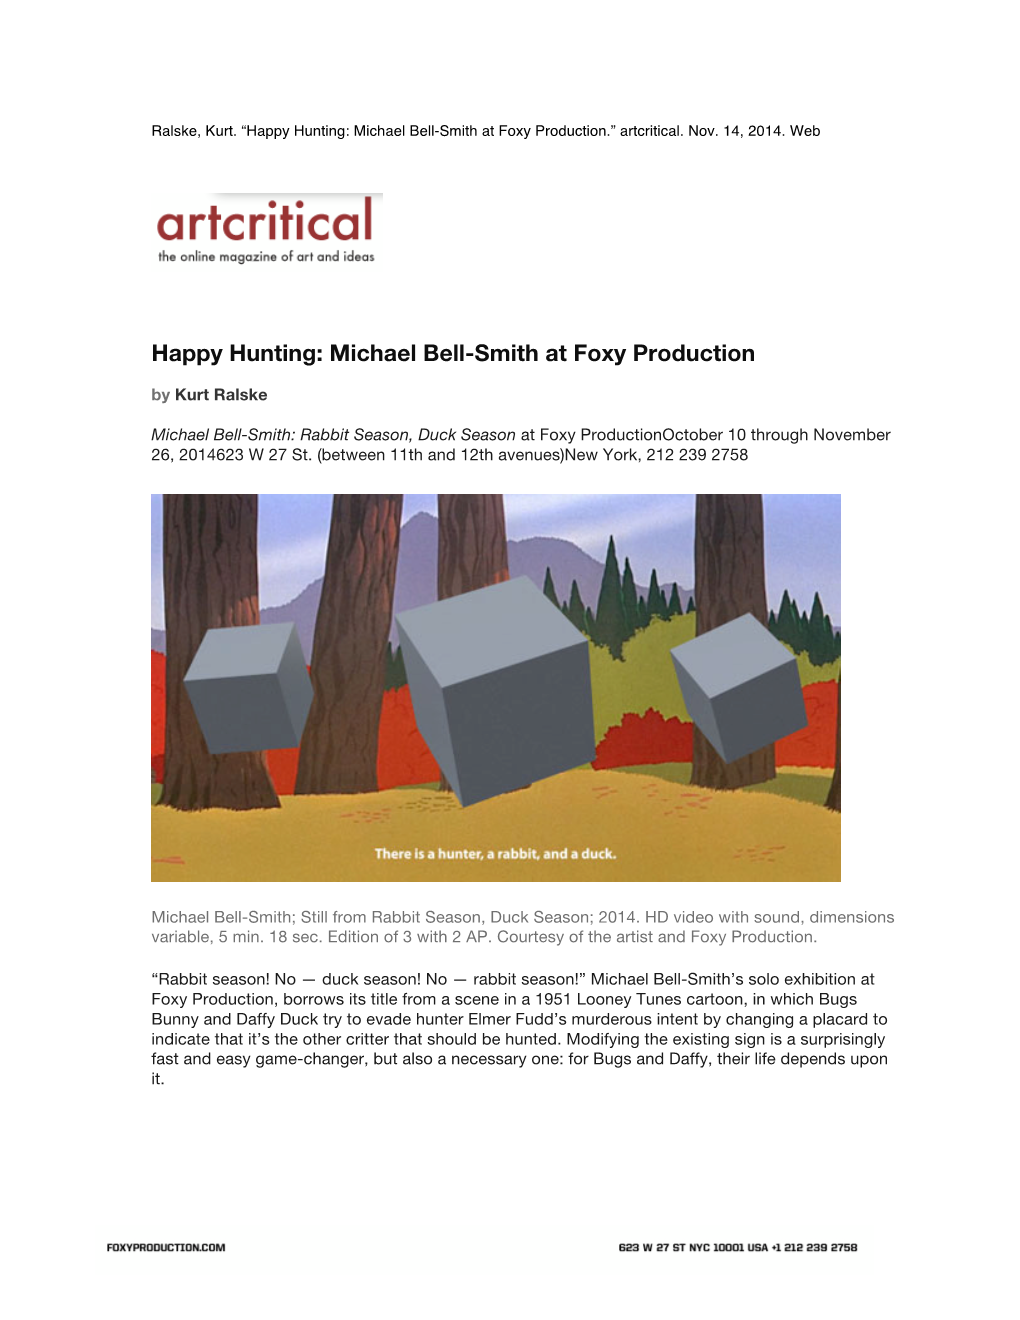 Happy Hunting: Michael Bell-Smith at Foxy Production.” Artcritical